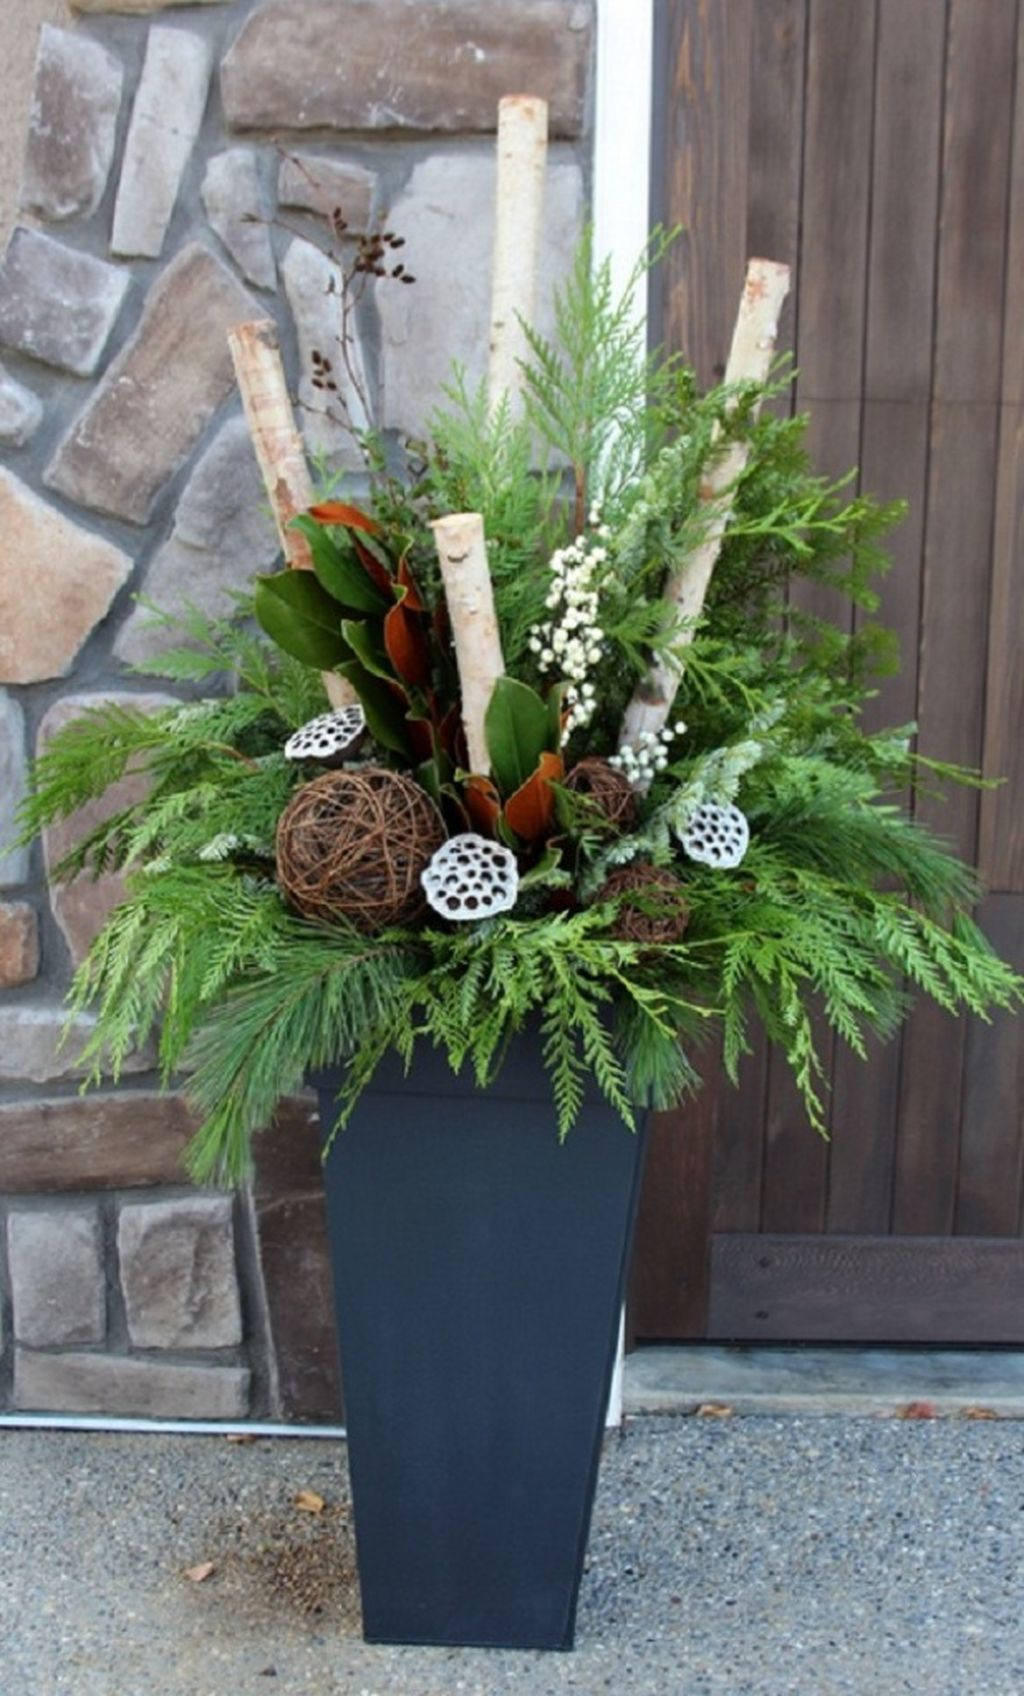 Marvelous Outdoor Holiday Planter Ideas To Beauty Porch Décor 20